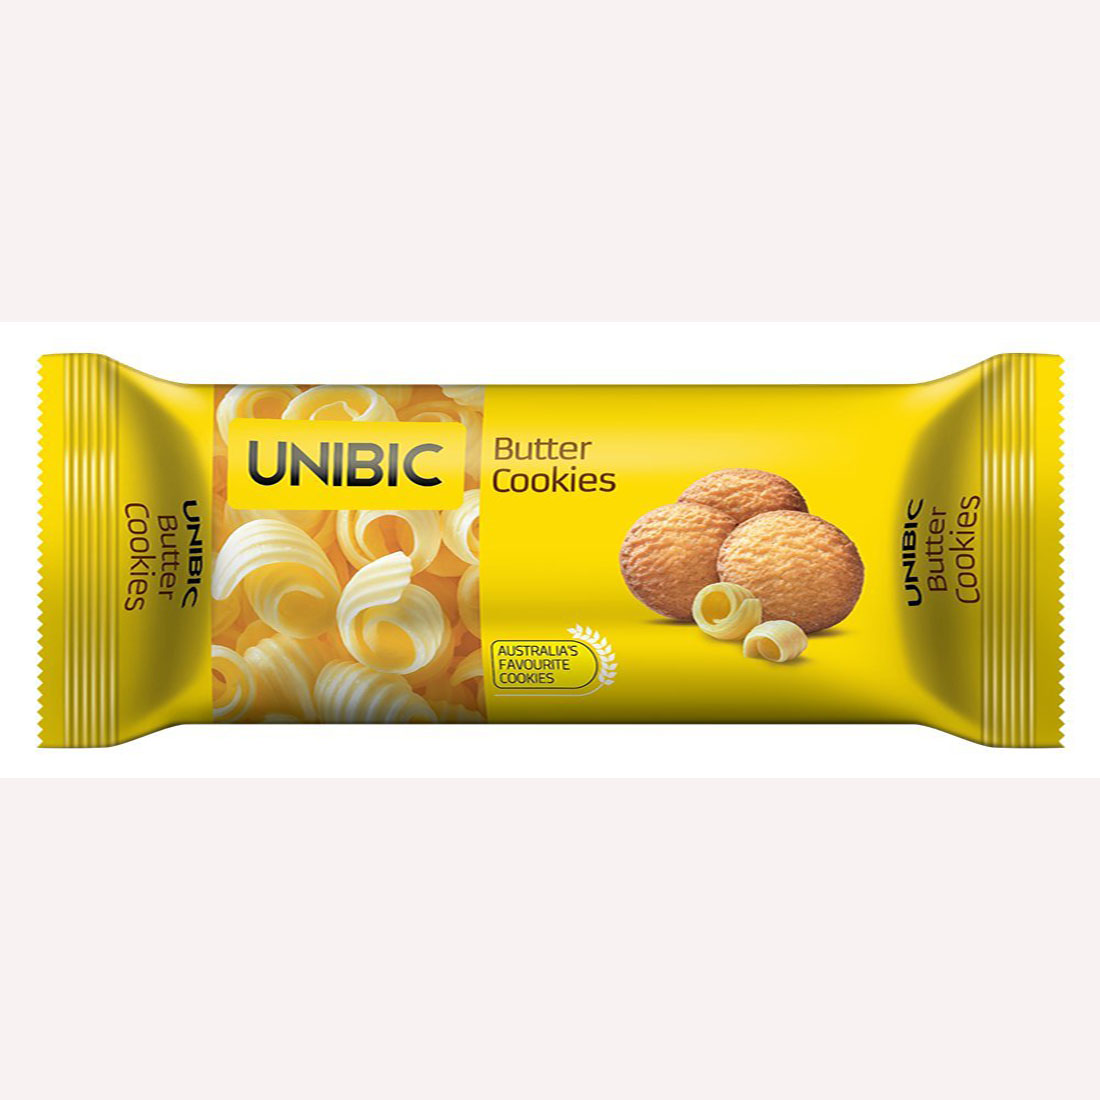 UNIBIC BUTTER COOKIES BISCUIT 75G